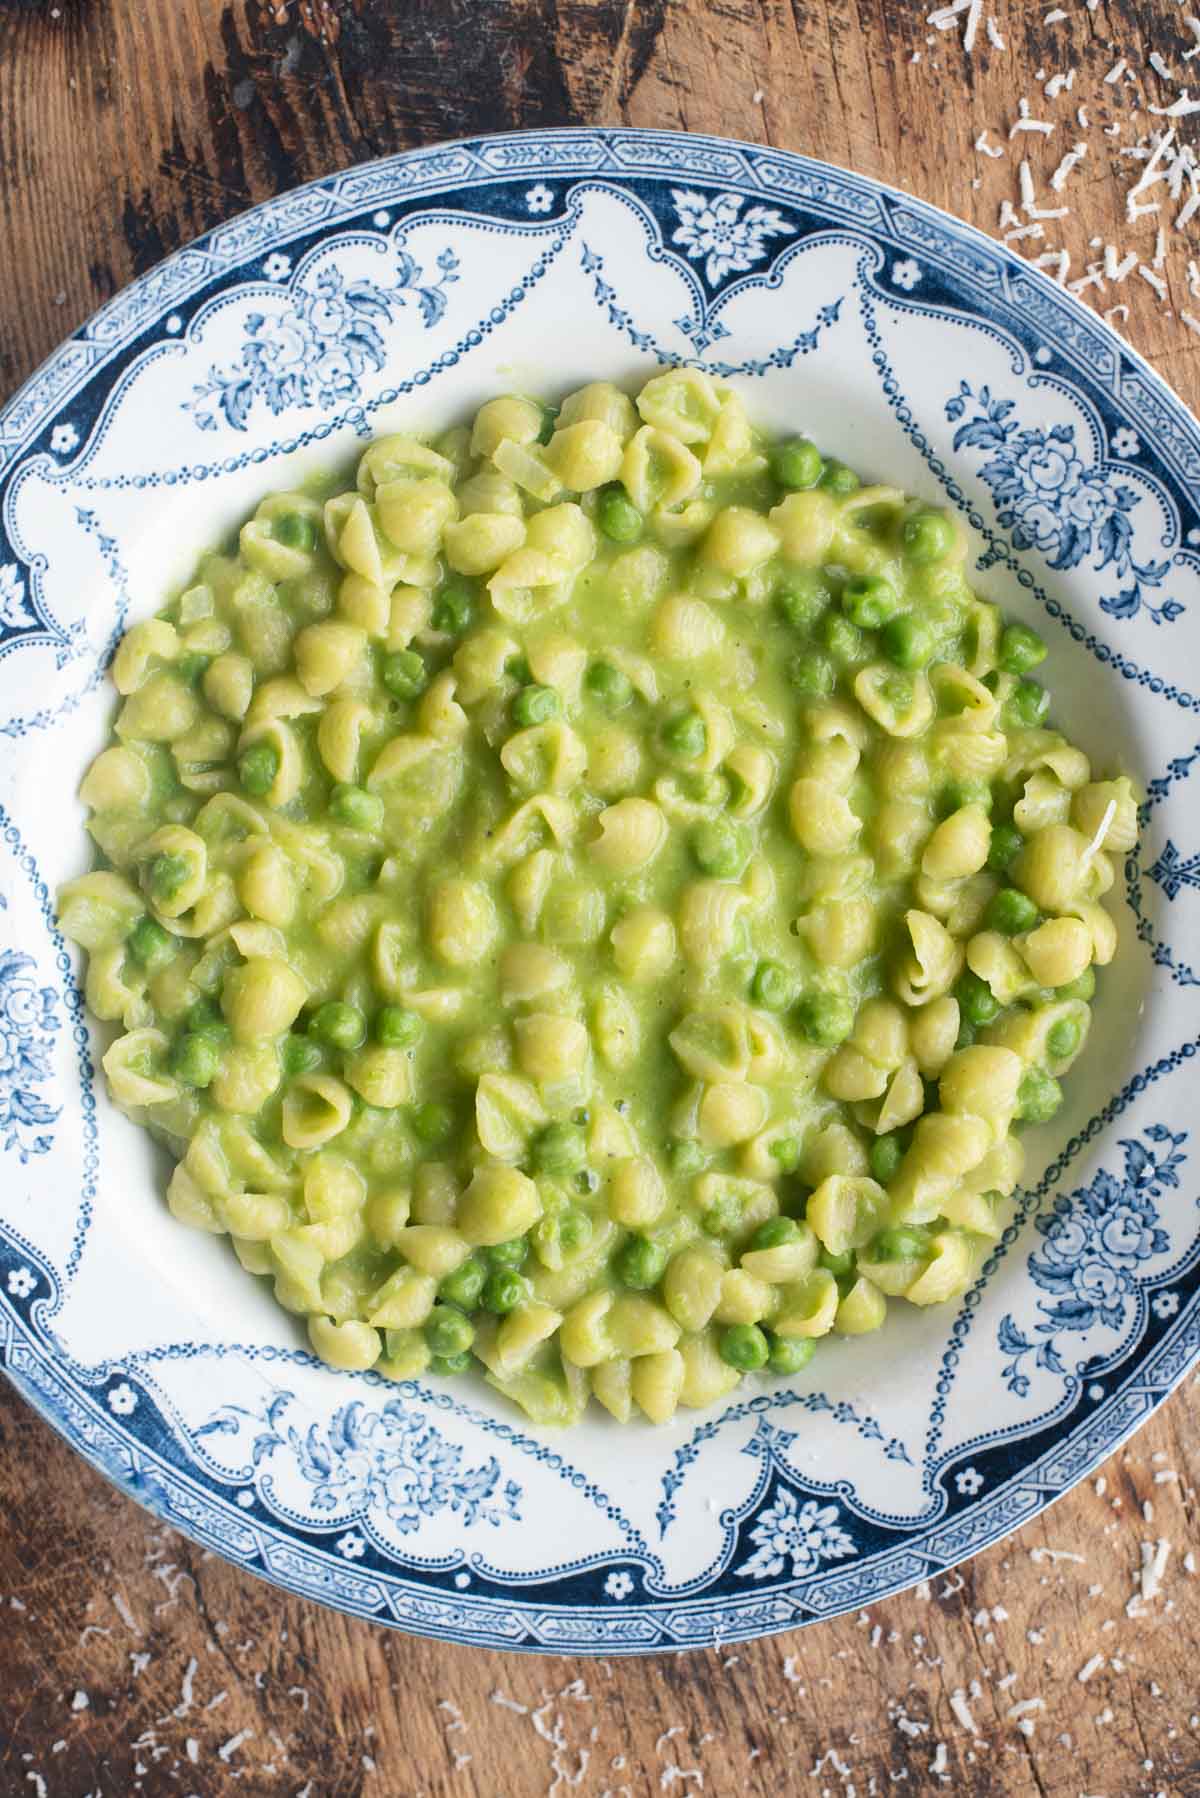 A close up of pasta and peas in a blue and white bowl.